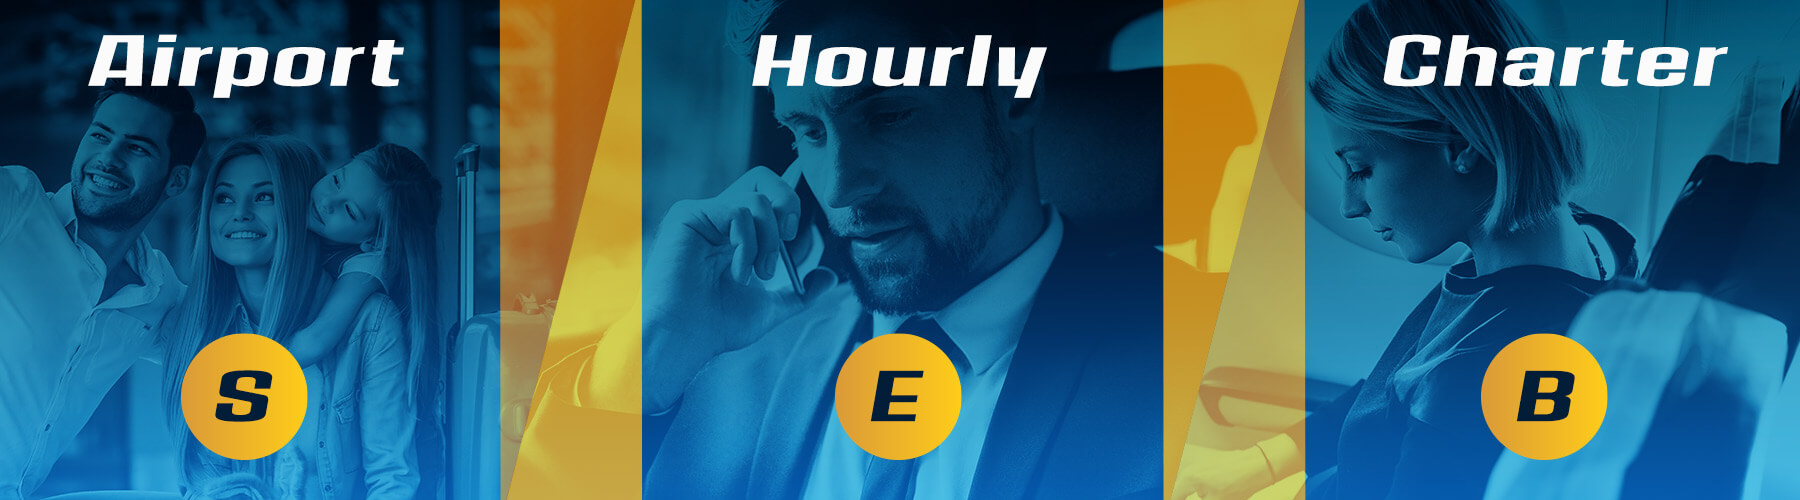 Airport Hourly Charter